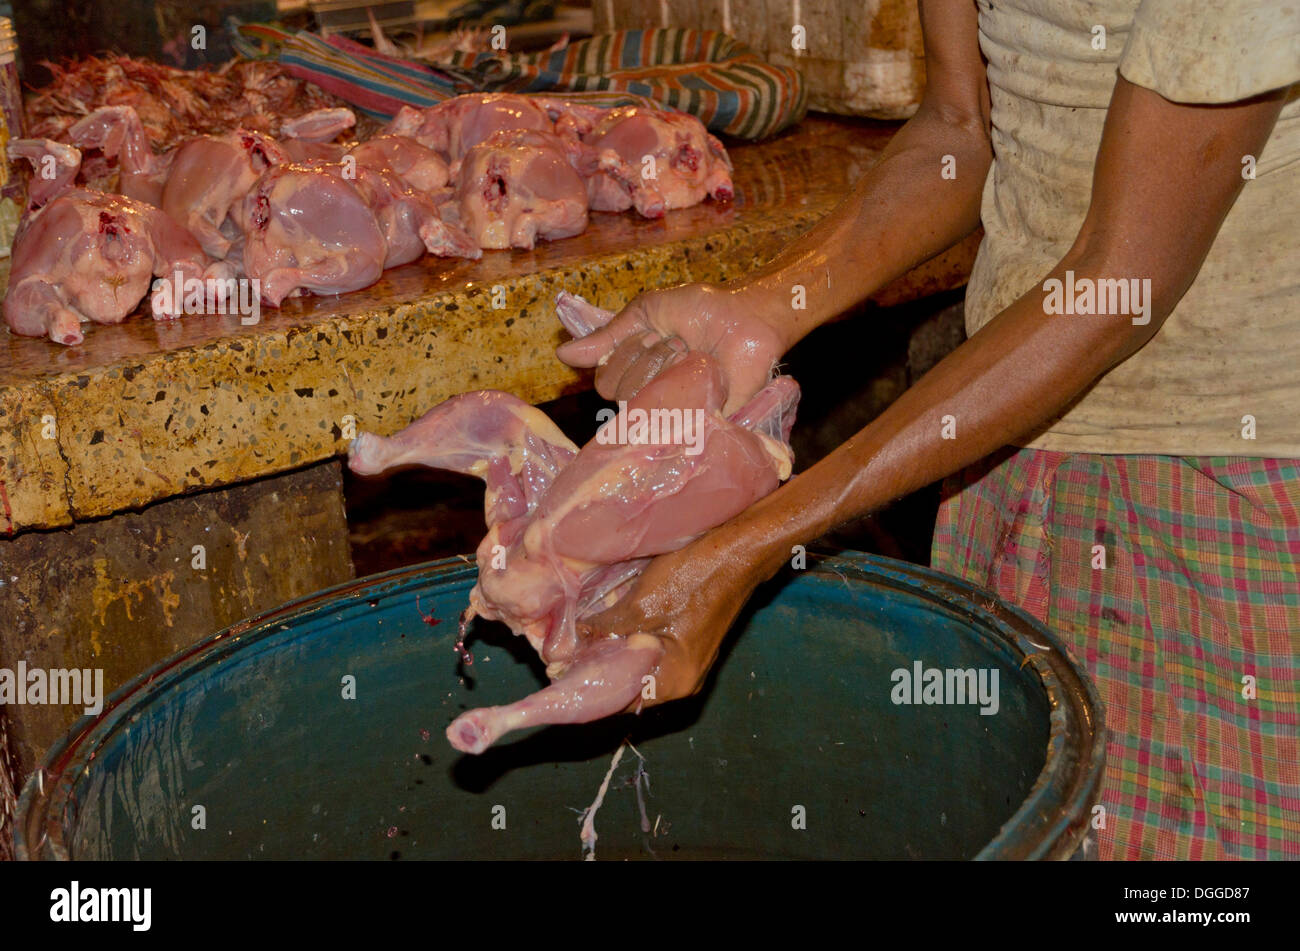 Slaughtering chicken at the chicken market in Kolkata, India, Asia Stock Photo